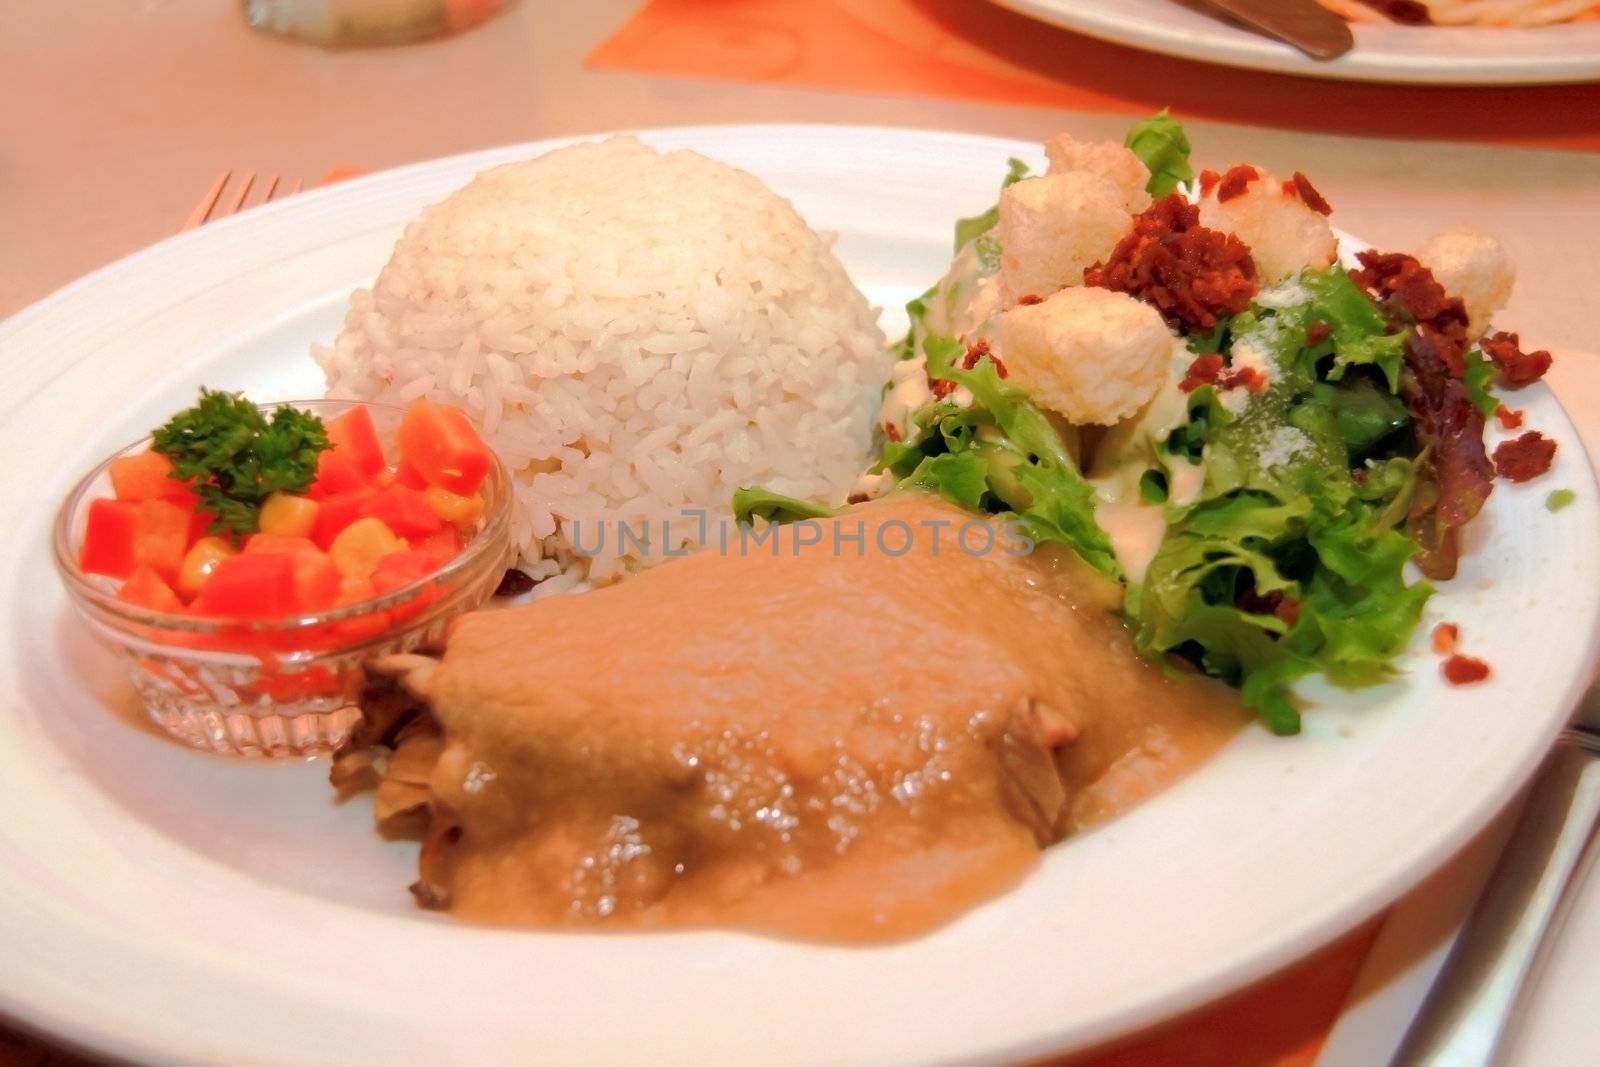 roast beef meal with salad and vegetable side dish
